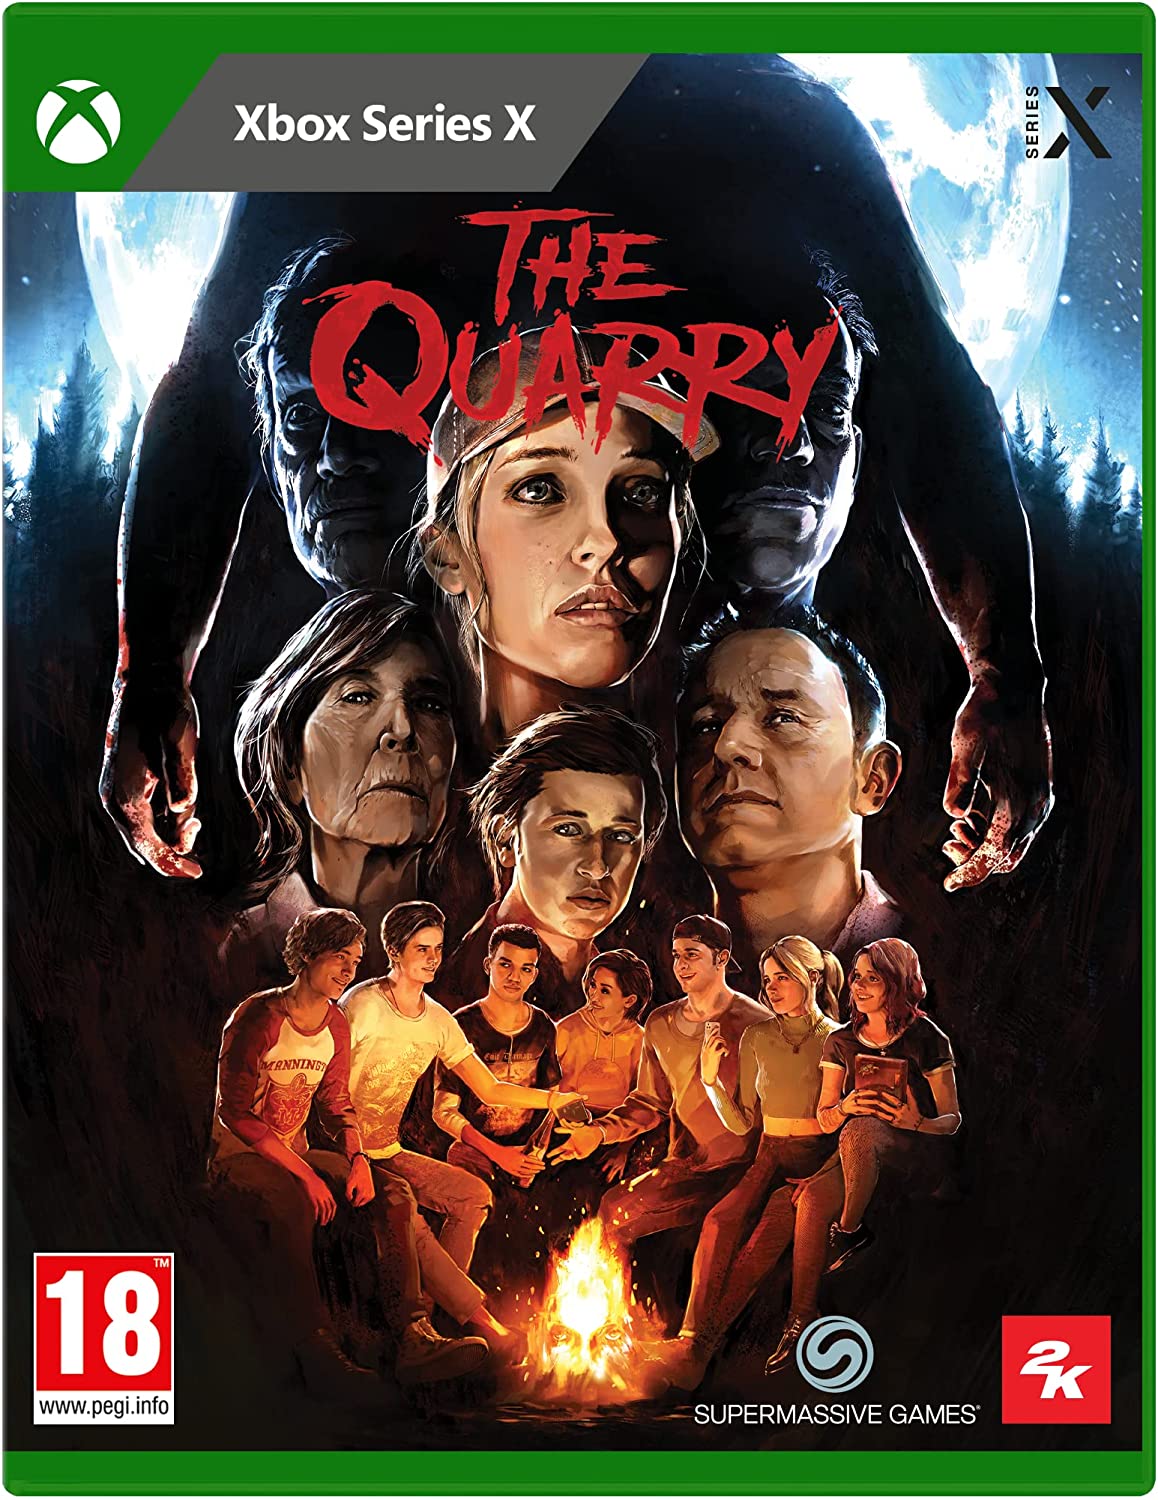 The Quarry Digital Download Key (Xbox One): VPN Activated Key